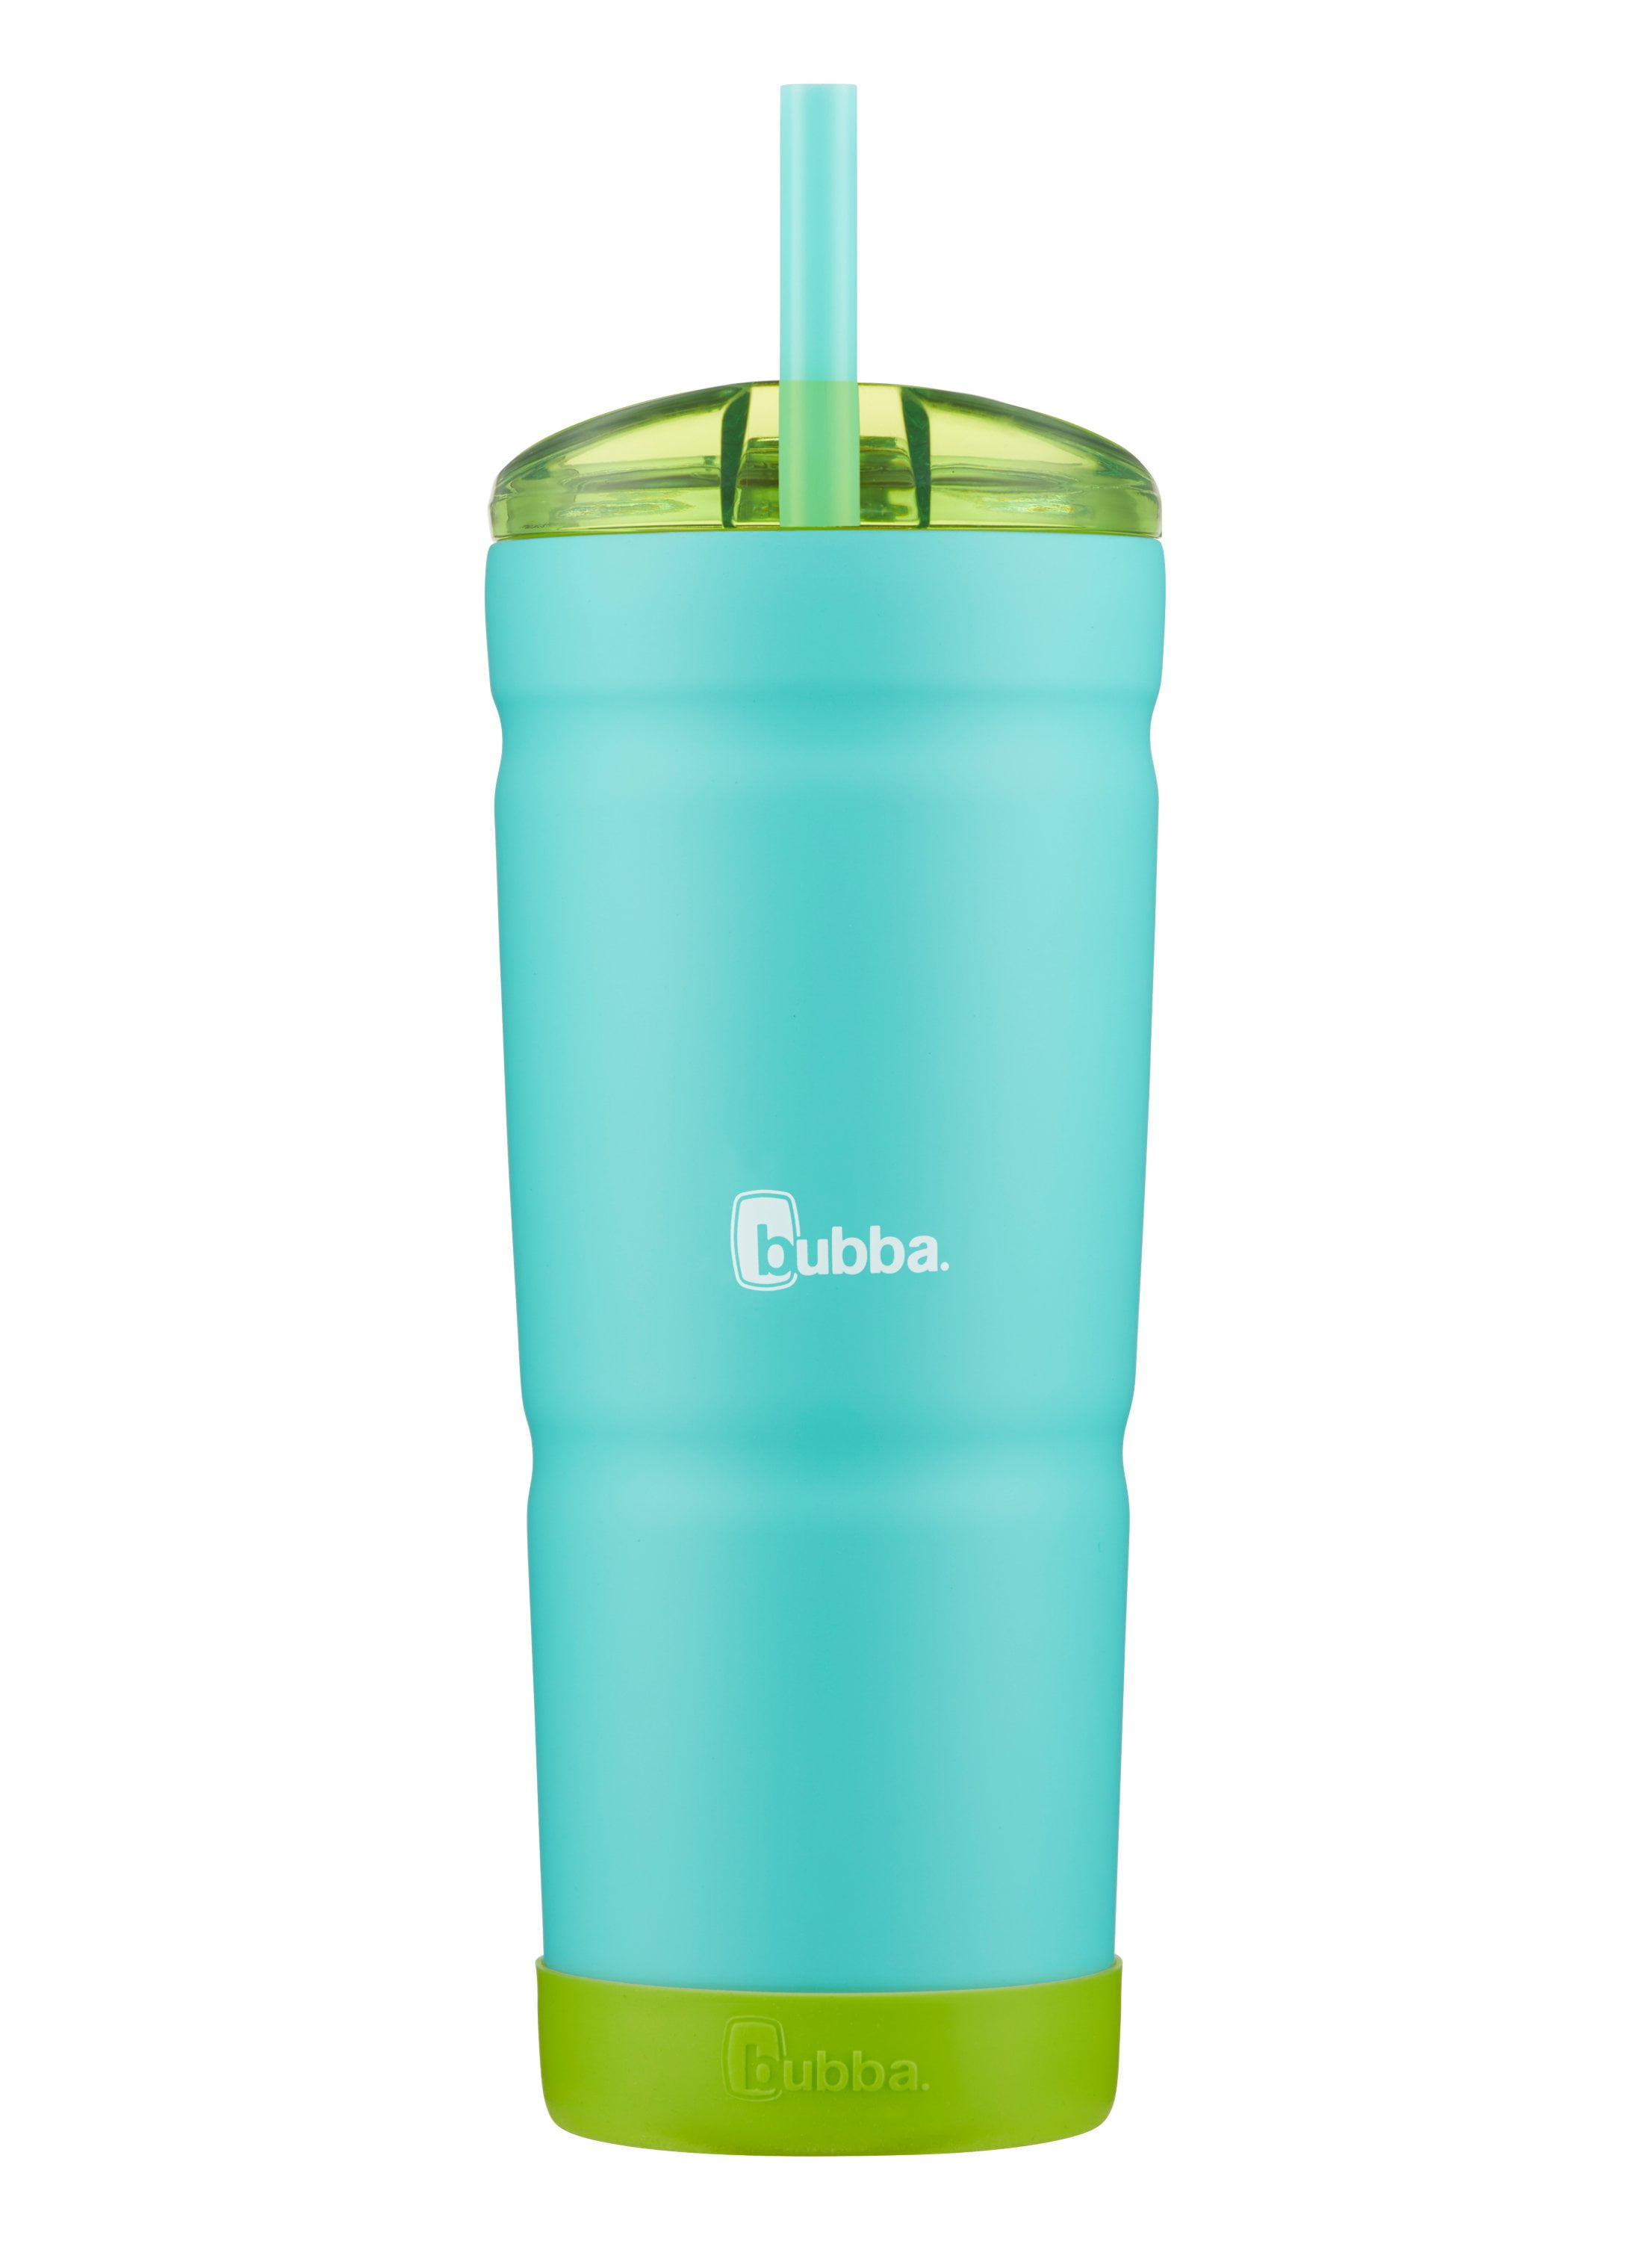 bubba Envy S Stainless Steel Tumbler with Straw and Bumper Rubberized in Teal, 24 fl oz.